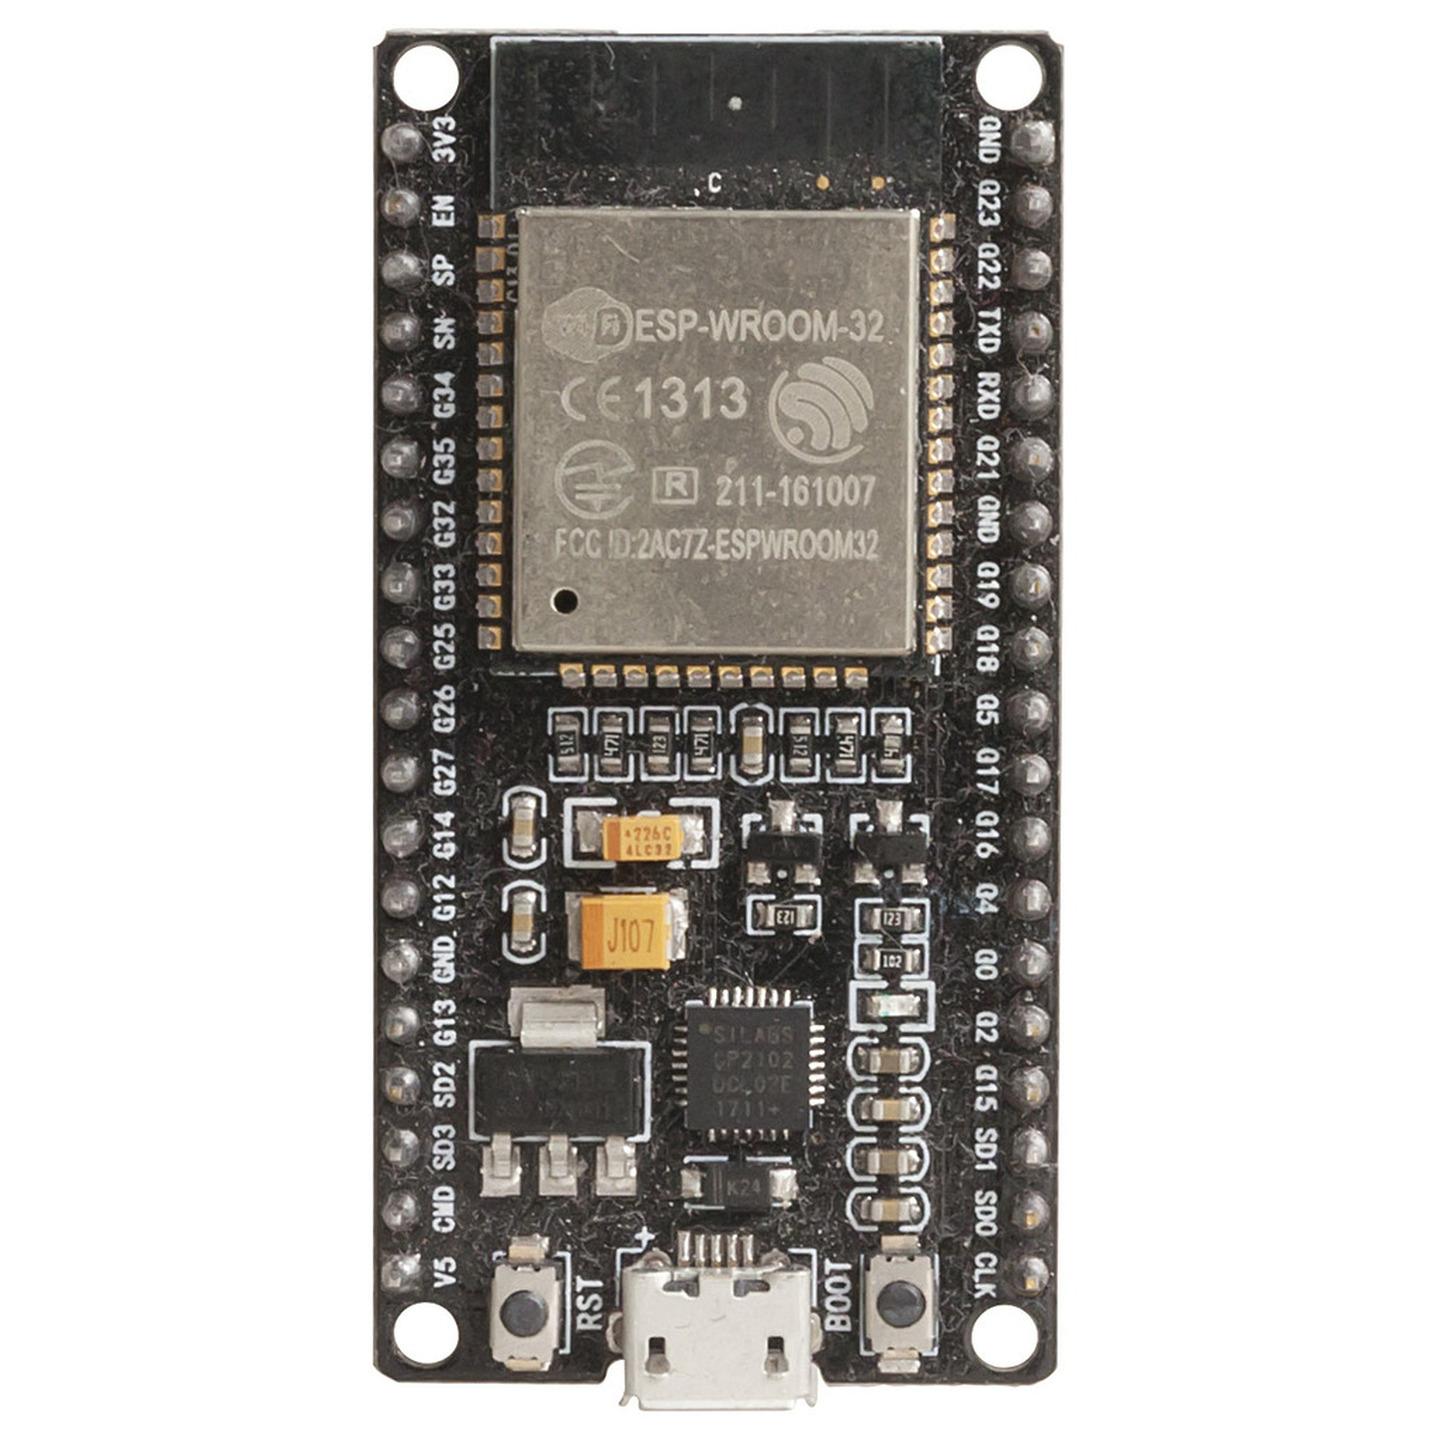 Duinotech ESP32 Main Board with Wi-Fi and Bluetooth